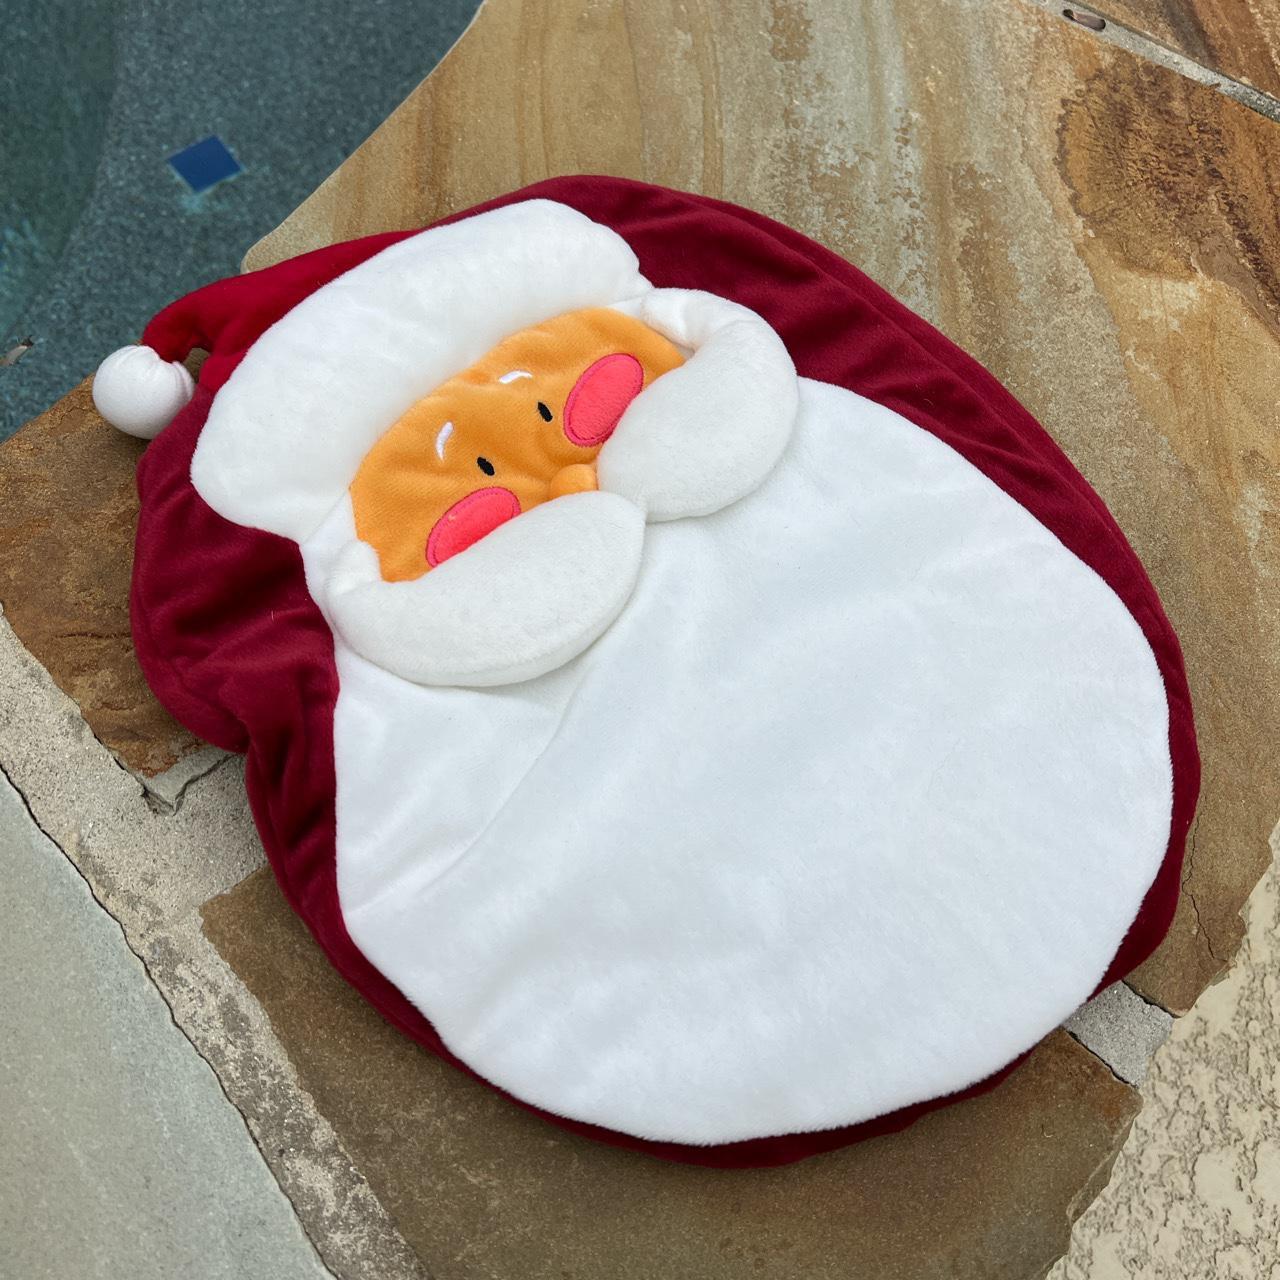 Product Image 3 - GIFTING SANTA TOILET COVER

🌈Standard size